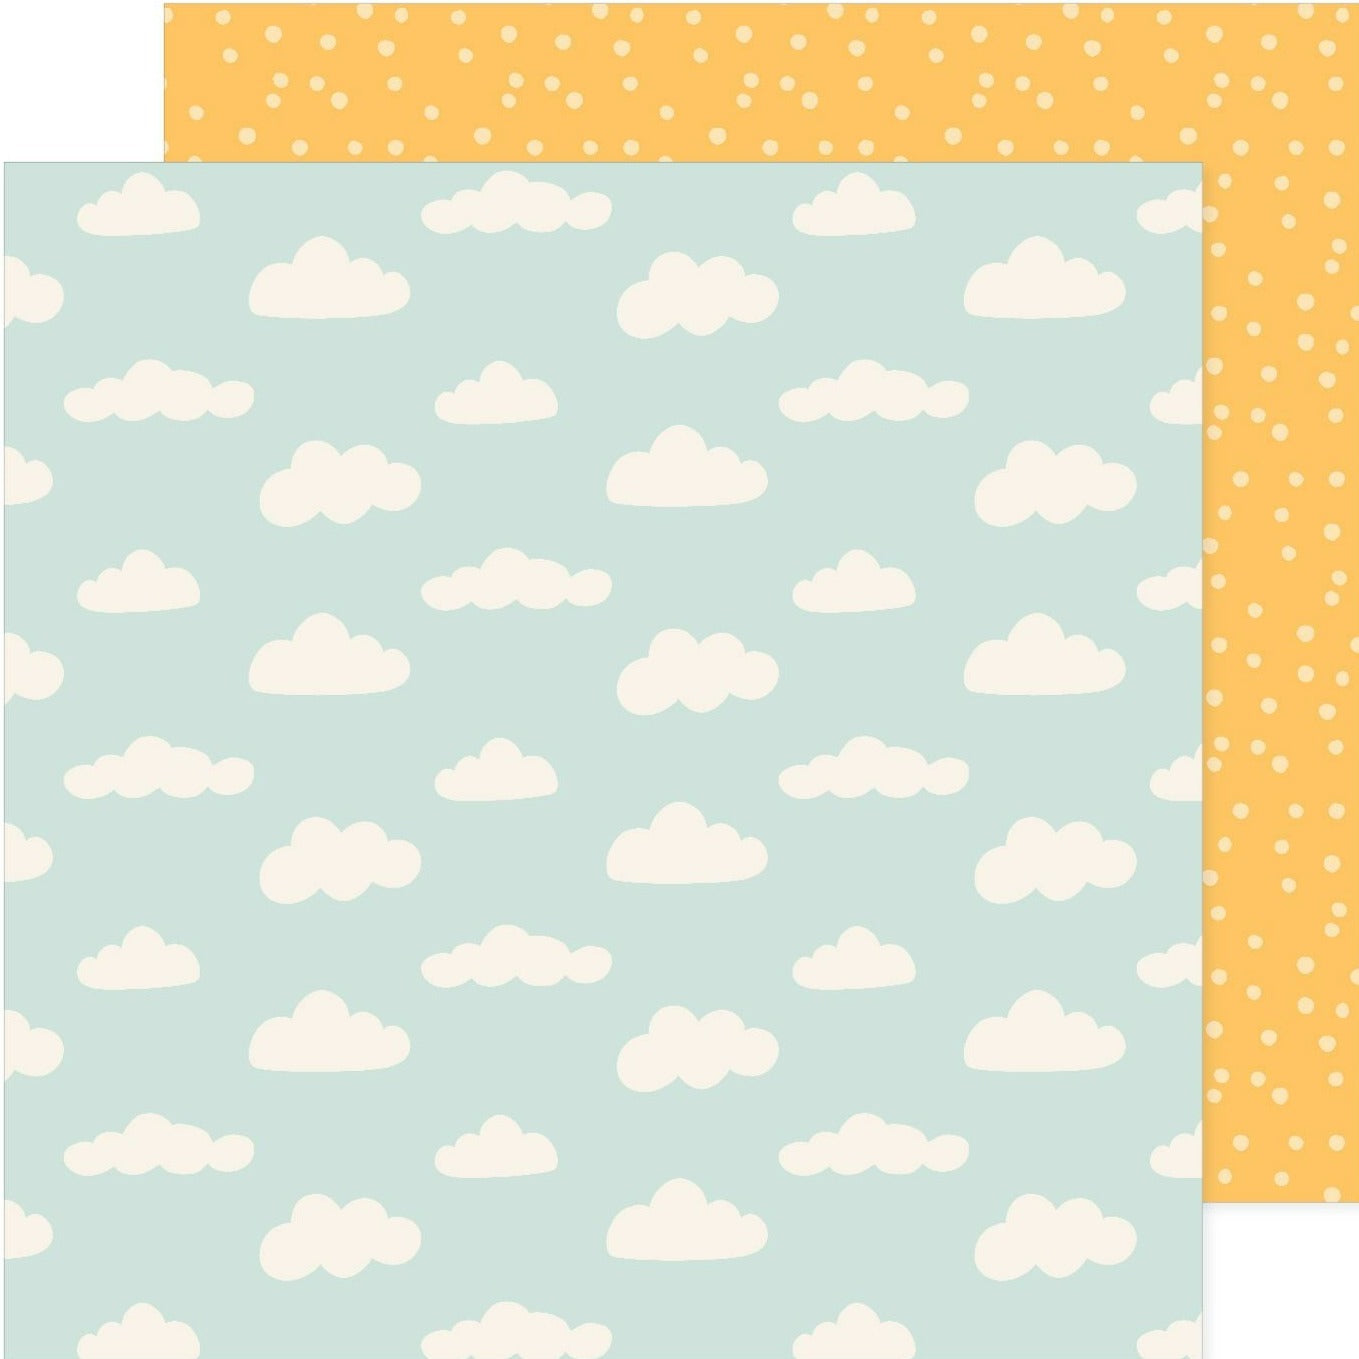 (cream clouds of varied sizes on a sky blue background - cream dots on a yellow background reverse). 12x12 double-sided paper by Pebbles.